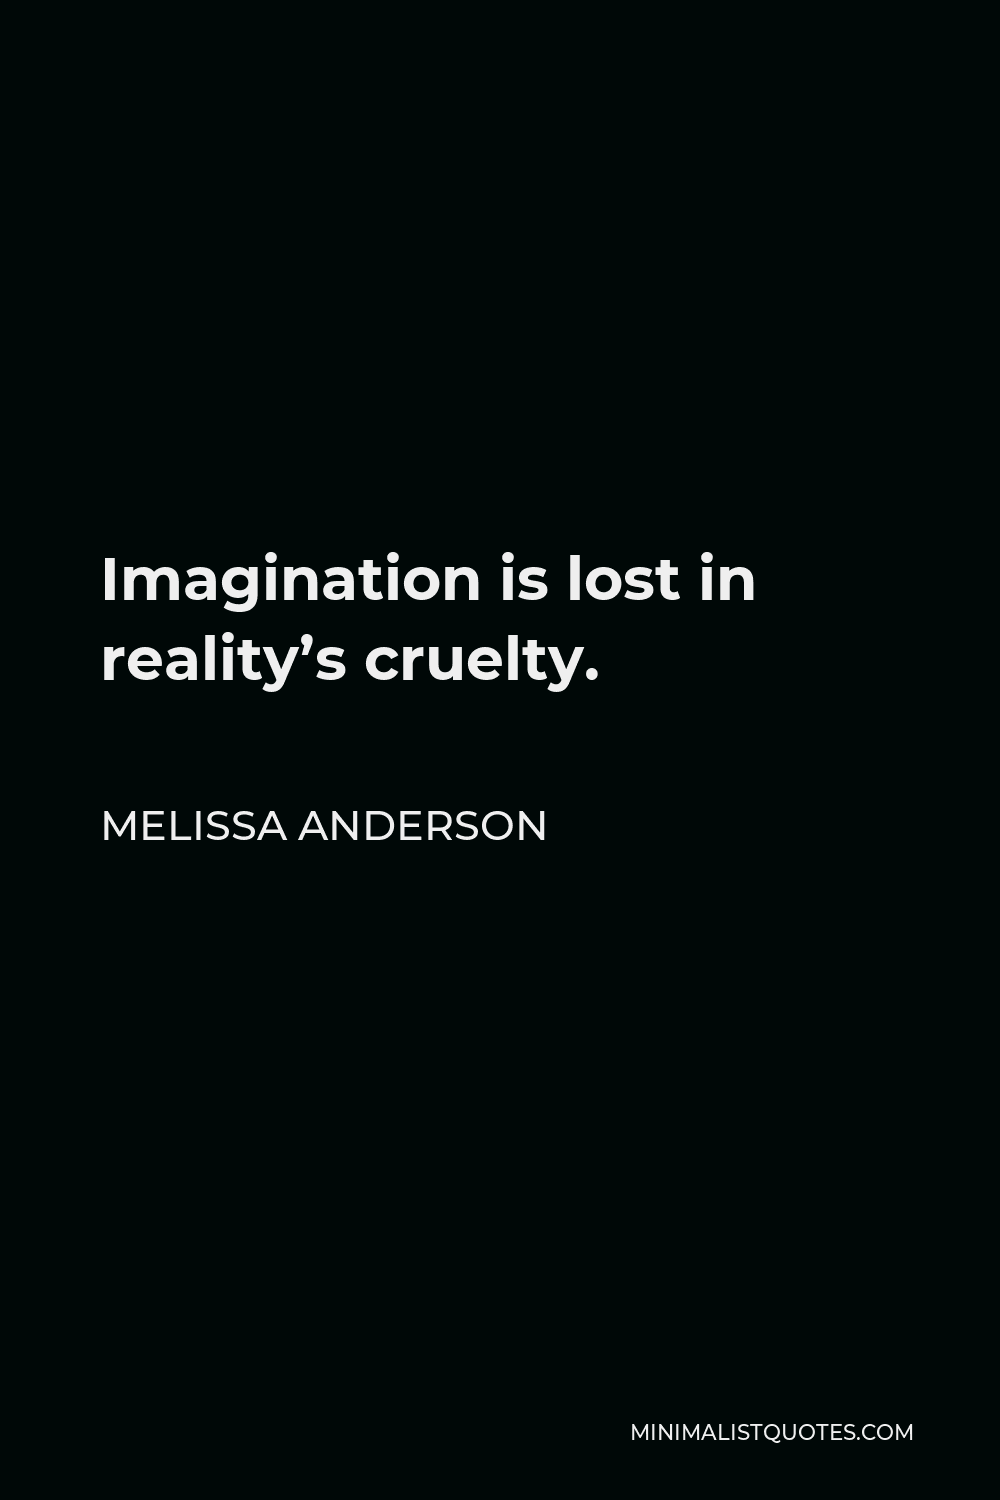 Melissa Anderson Quote - Imagination is lost in reality’s cruelty.